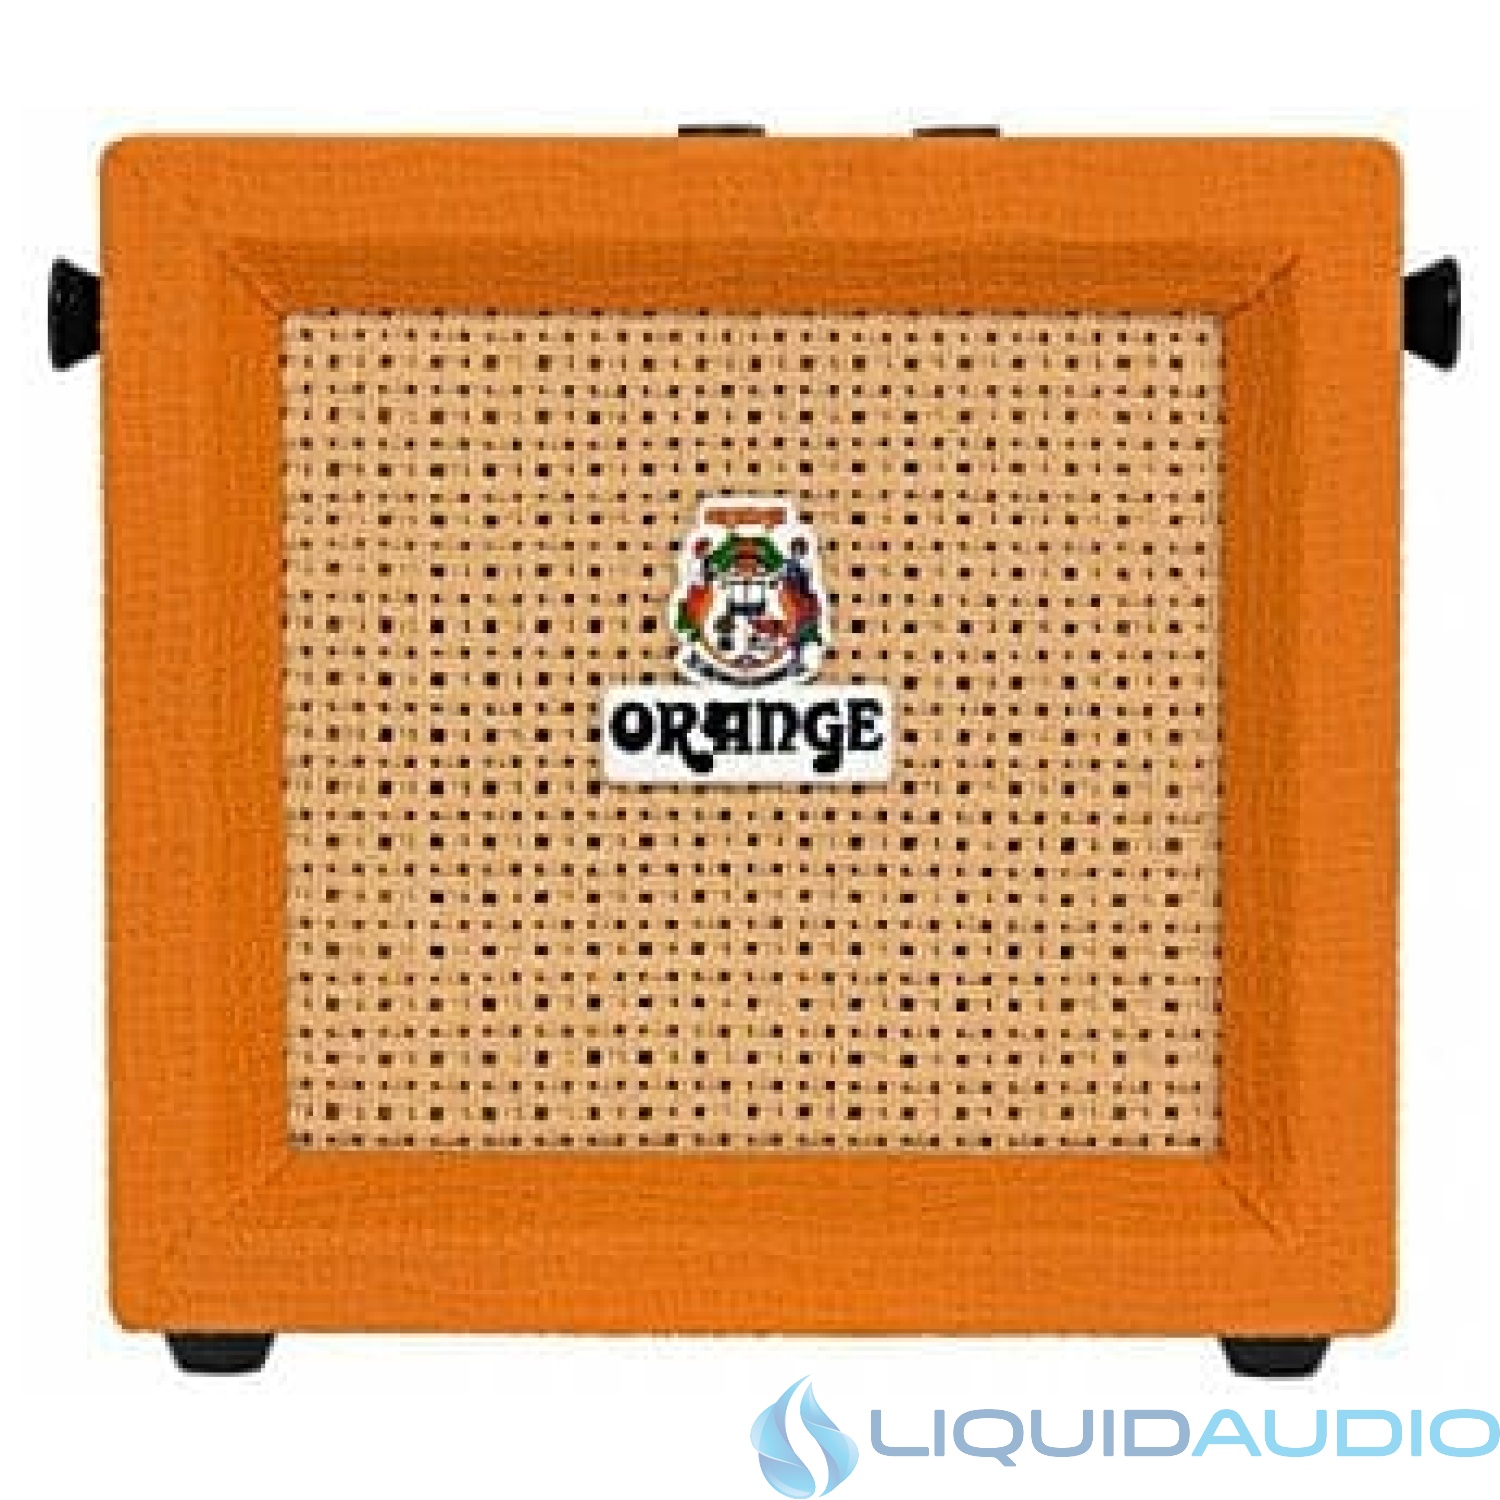 Orange MICRO CRUSH PIX | Ultra-Compact Basket Weave Speaker Grilled 3-Watt Guitar Combo Amplifier with Built-in Tuner and Overdrive